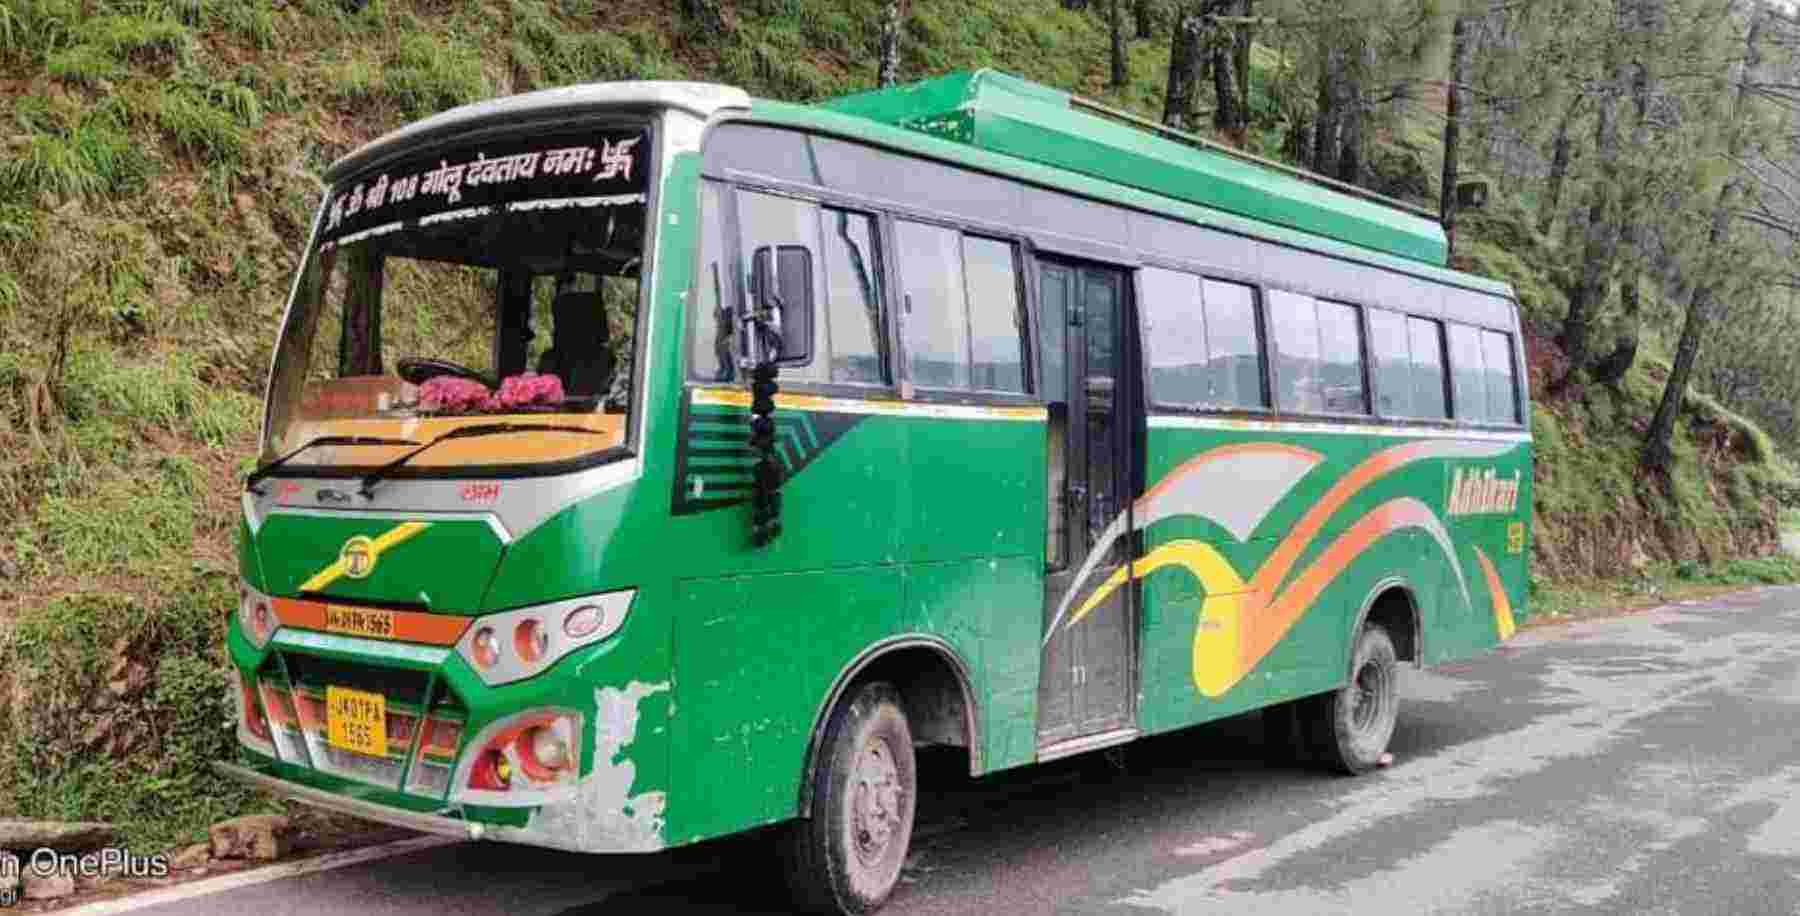 Uttarakhand: in someshwar Driver of Kemu bus found drunk, police seized the vehicle and arrested